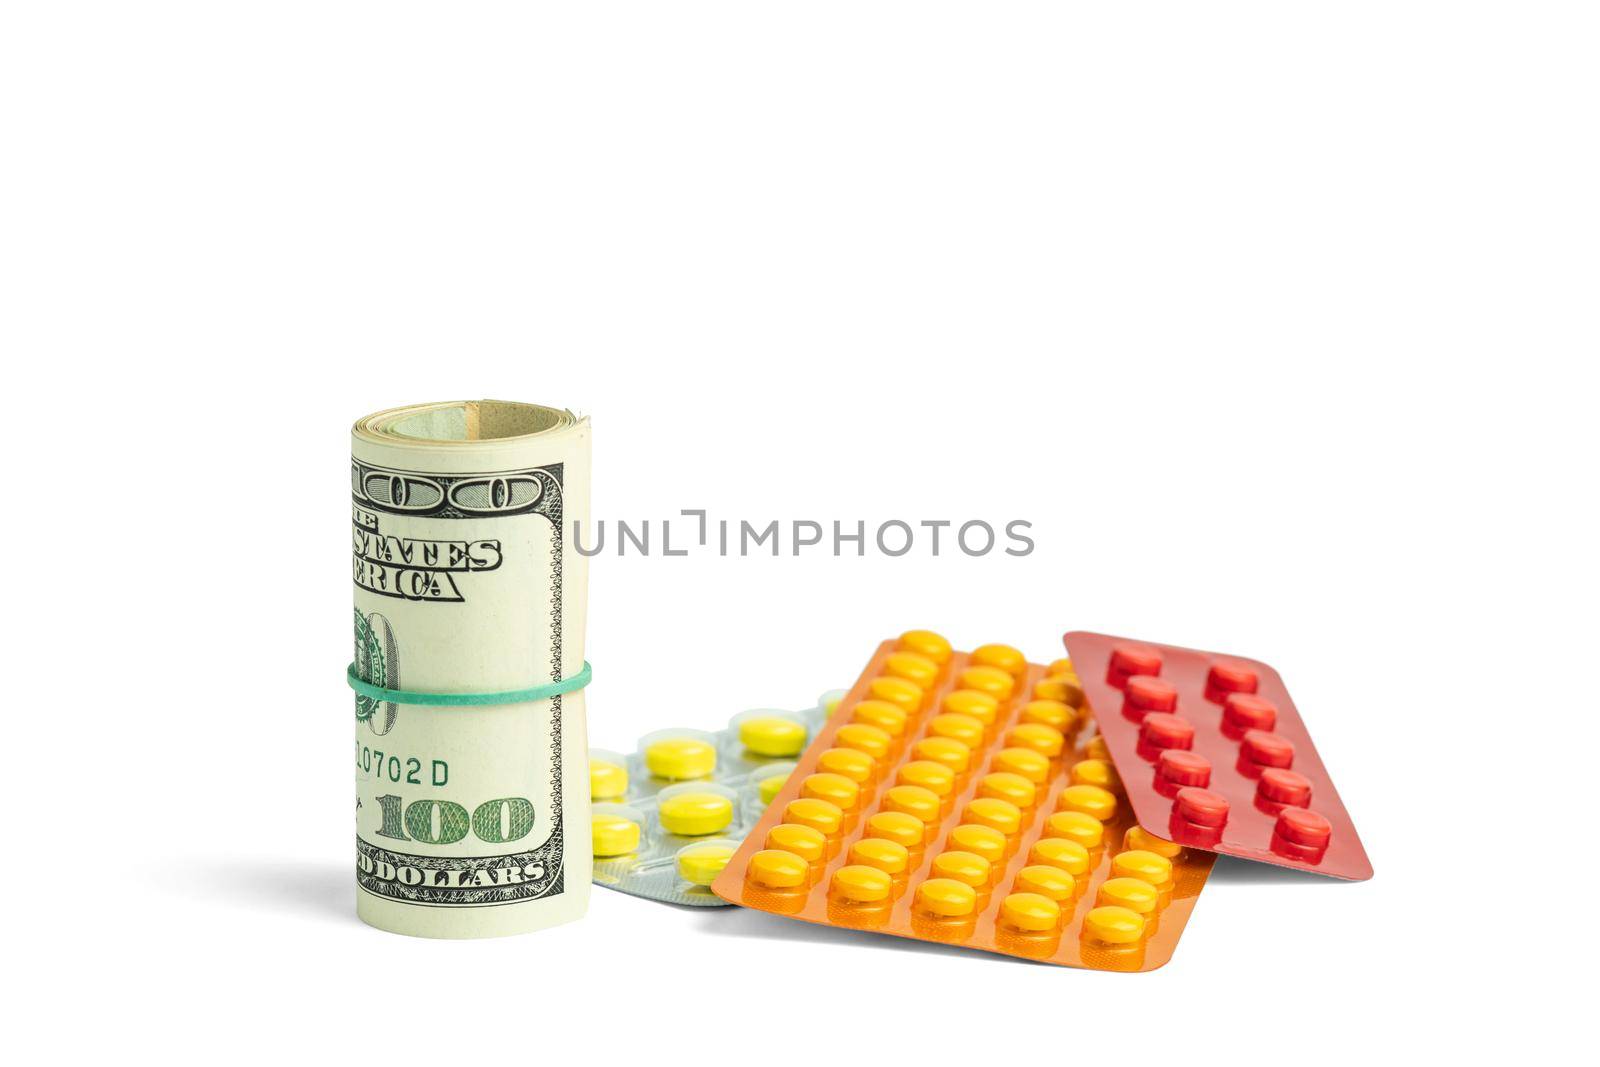 Rolled up banknotes next to medications. Treatment cost. Medical business. Pharmaceutical business. Objects isolated on white with shadow.